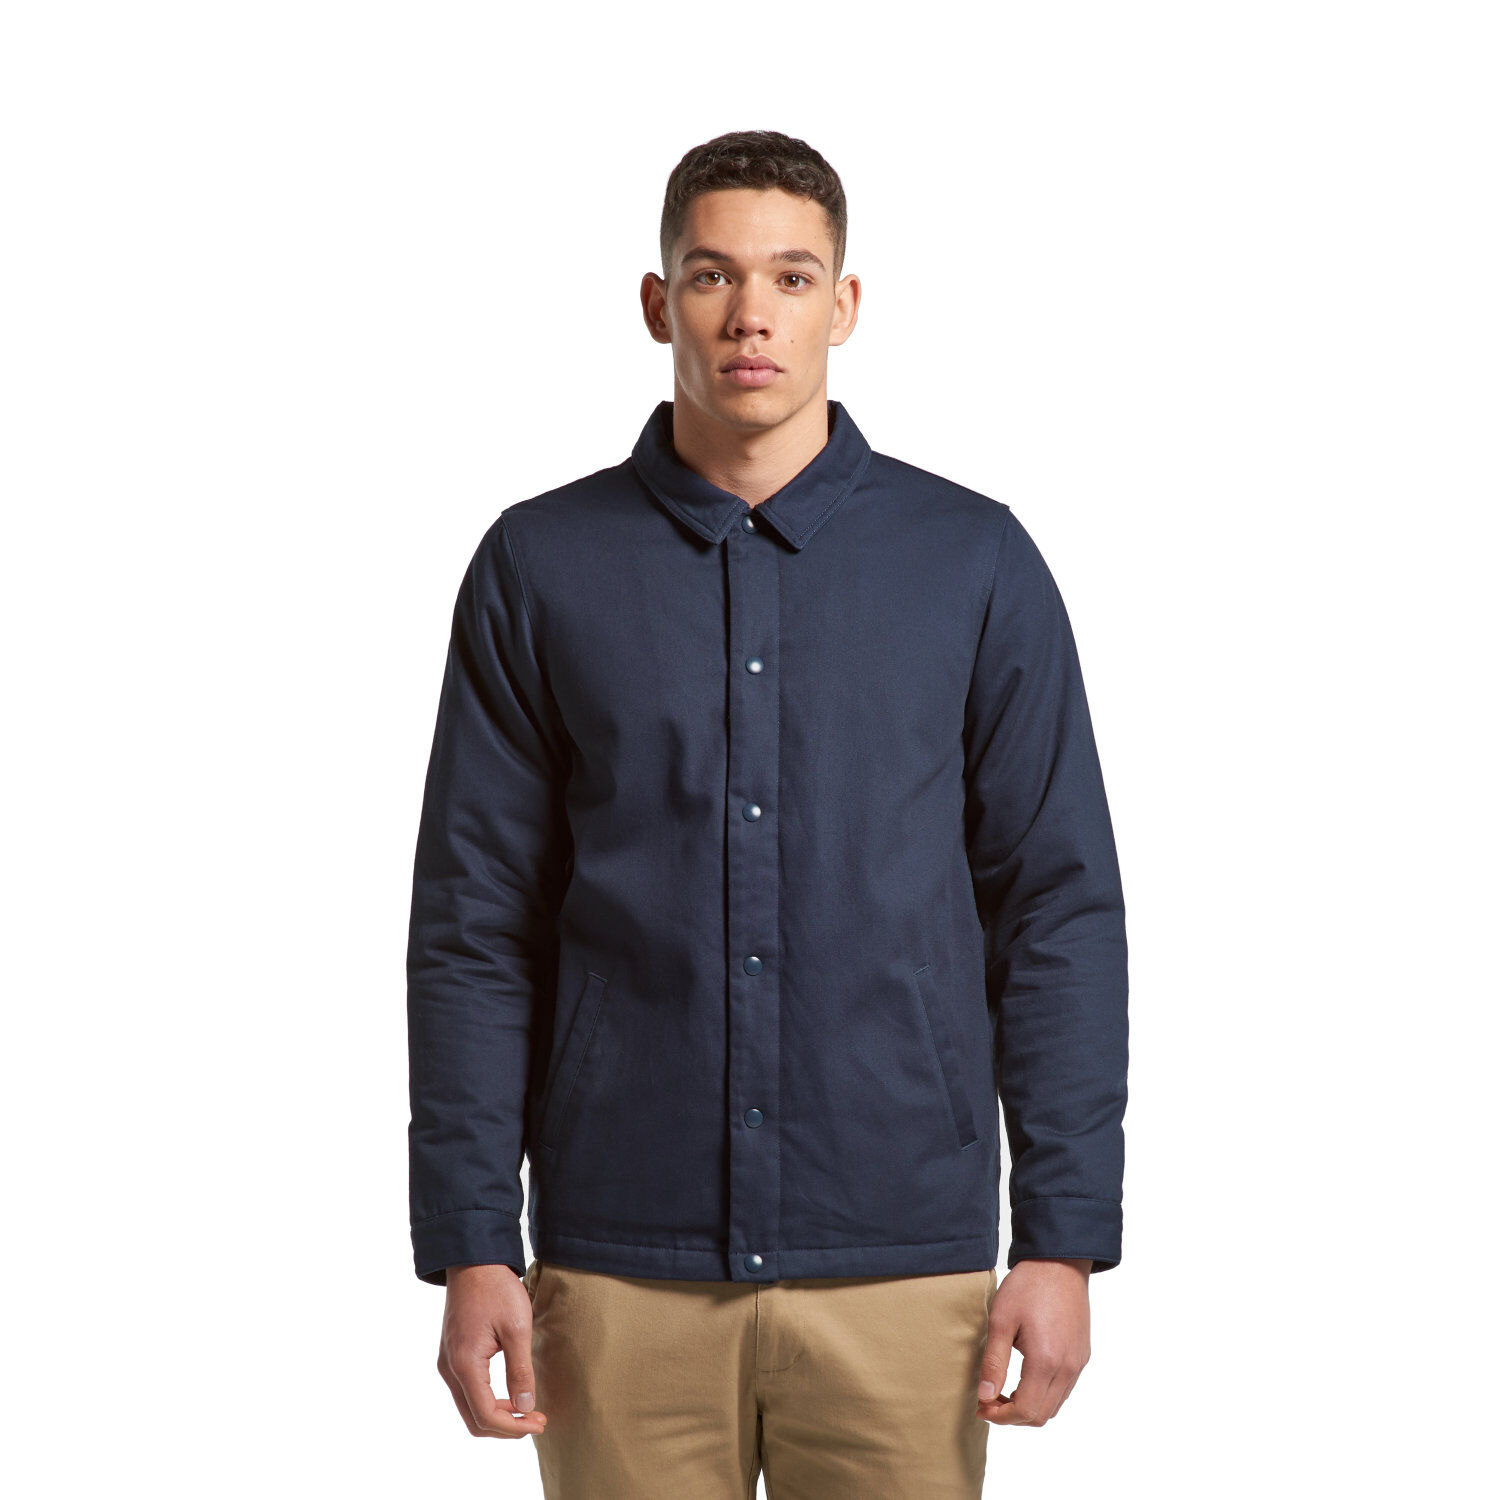 AS Colour Mens Work Jacket